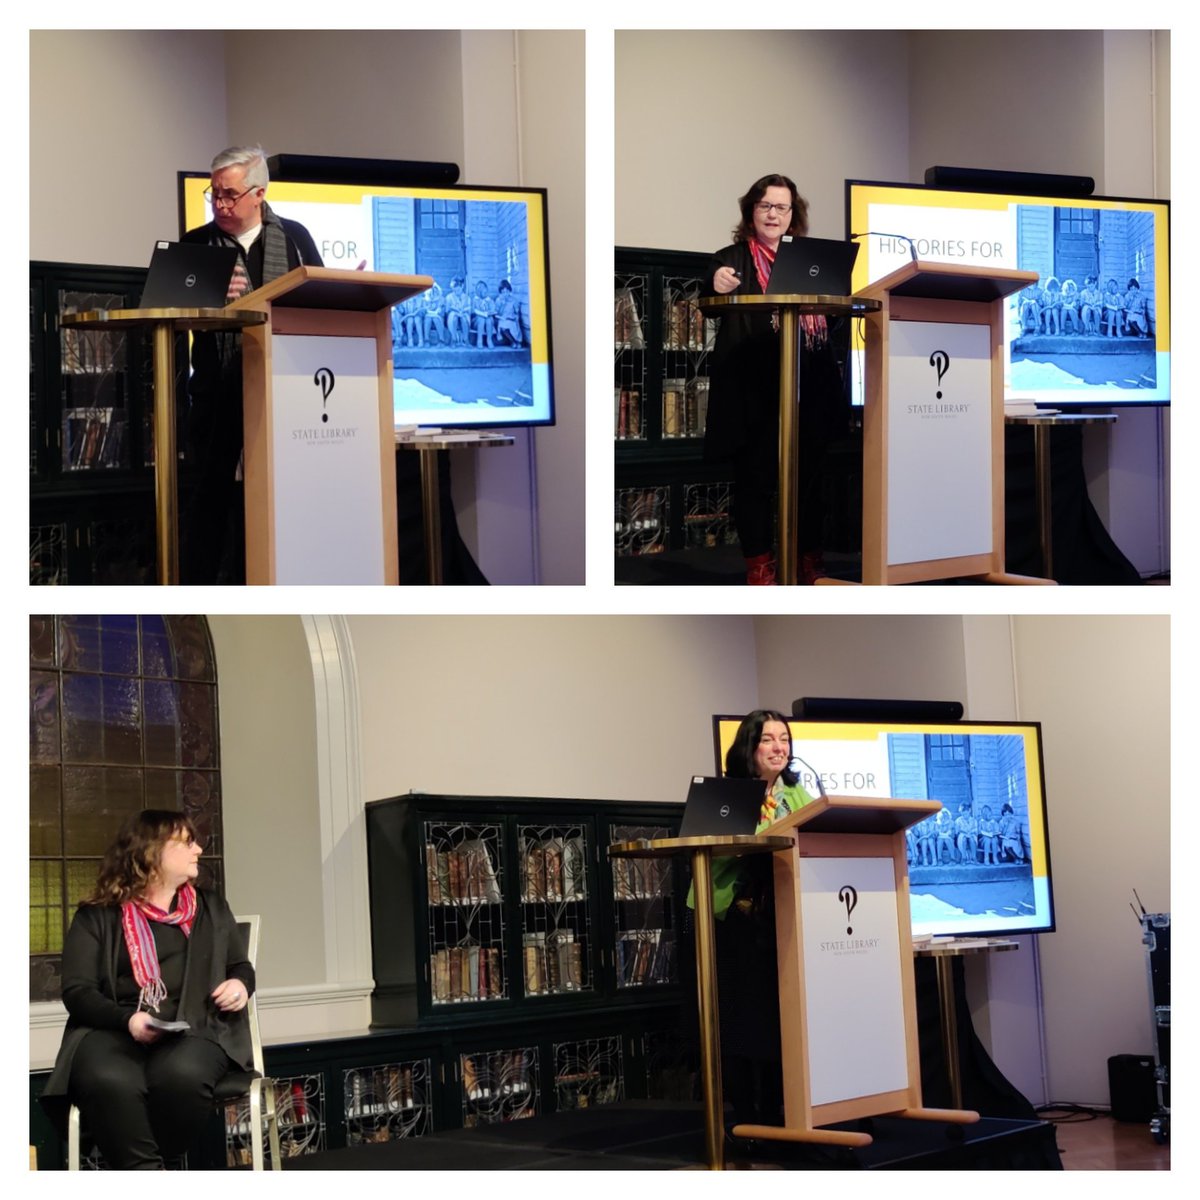 Thanks to @nenieb and @cfwriter for organising last night's 'Writing history for children' session - another @pha_nsw event generously hosted by @statelibrarynsw Paul Ashton introduced publisher Claire Hallifax and author Sophie Masson, who both offered superb advice.